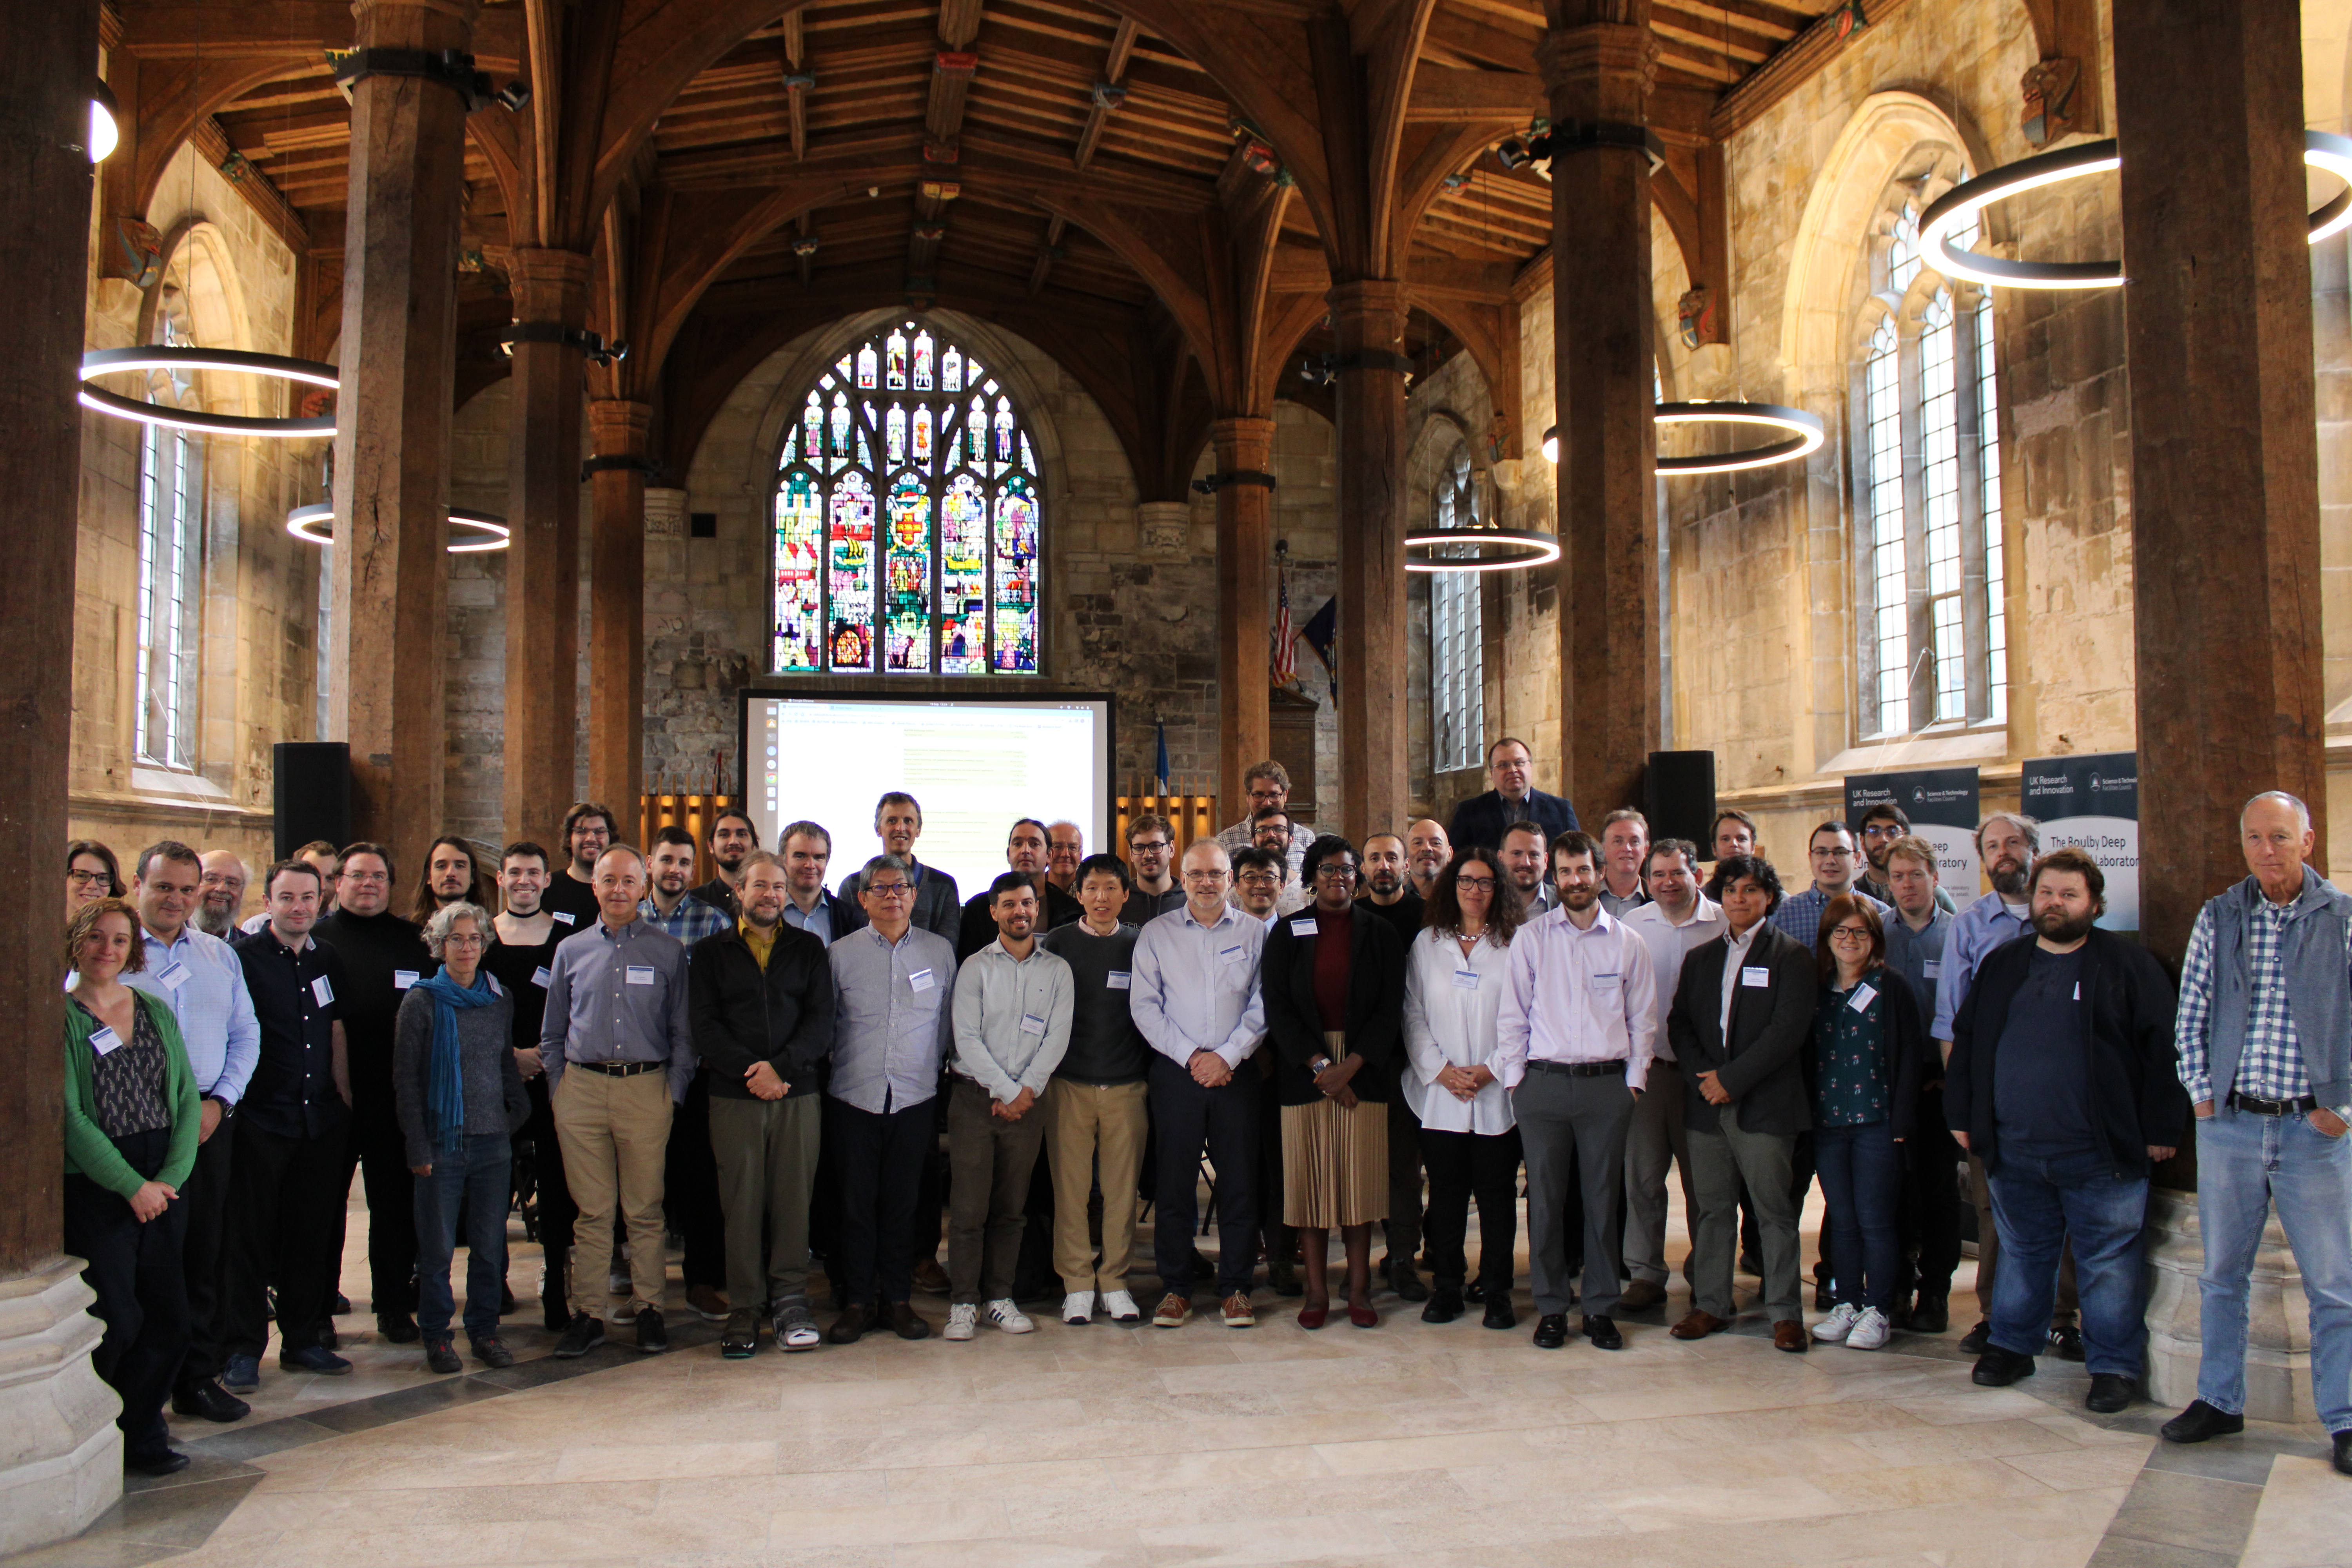 Conference photo - delegates in the conference space at the Guildhall, York